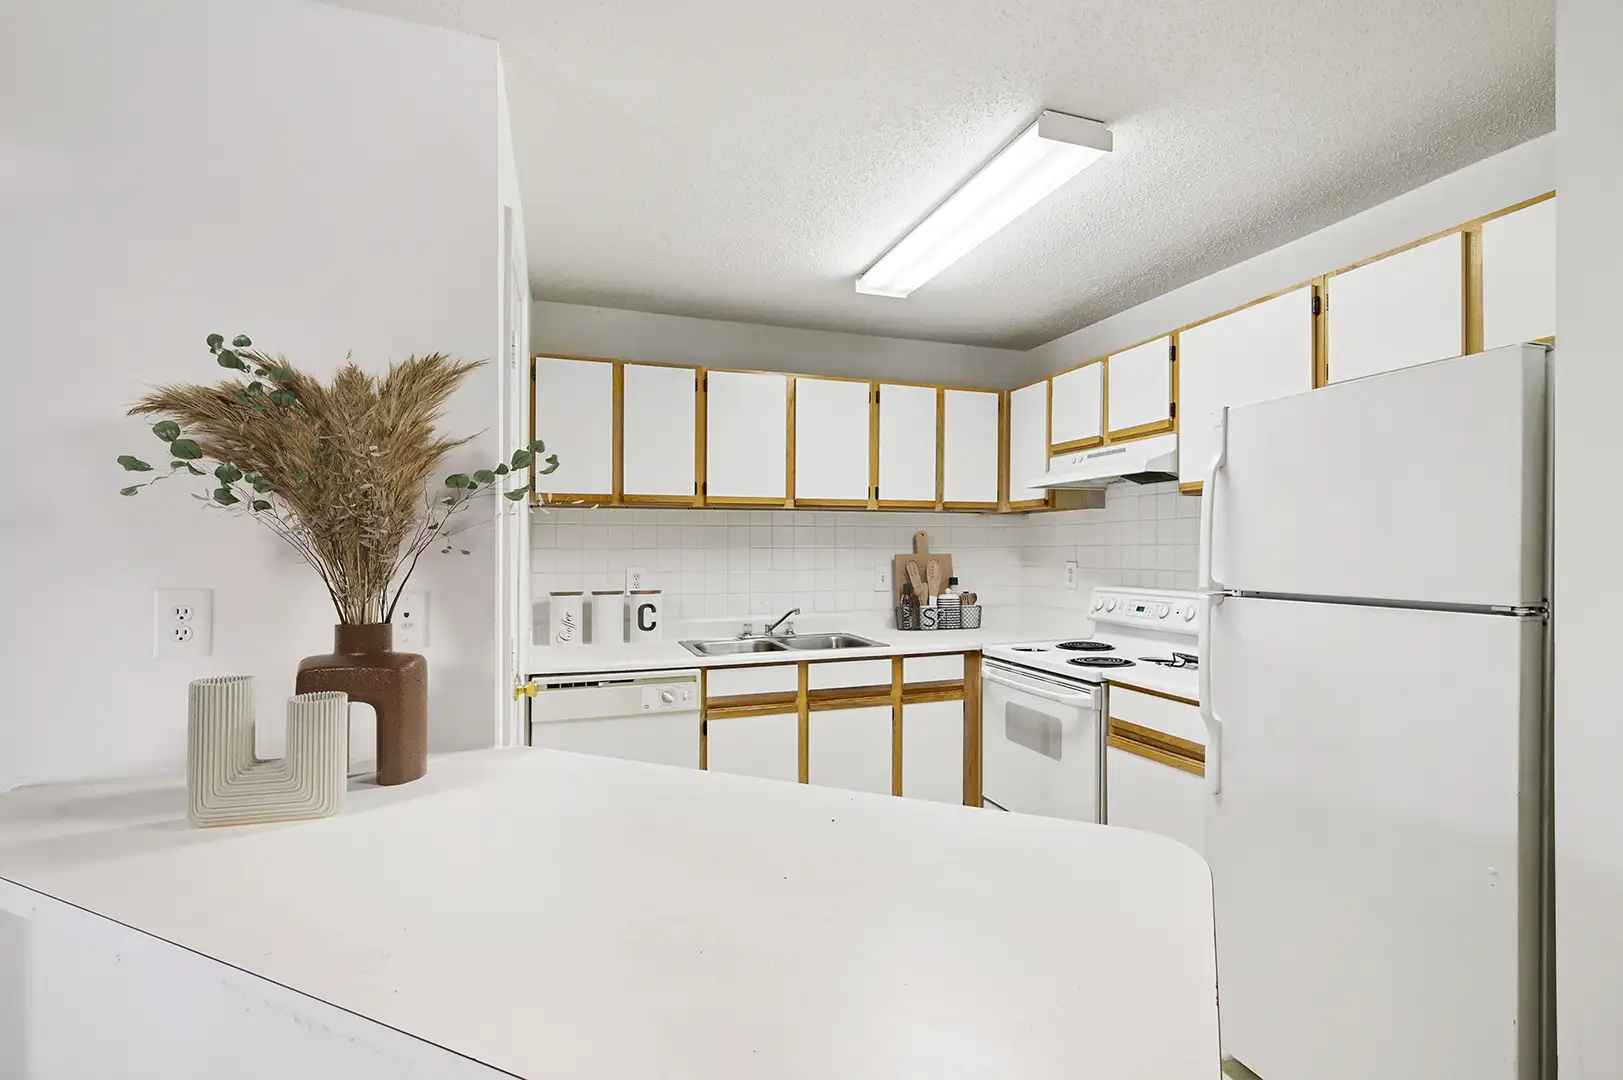 Kitchen with white cabinet doors and white appliances